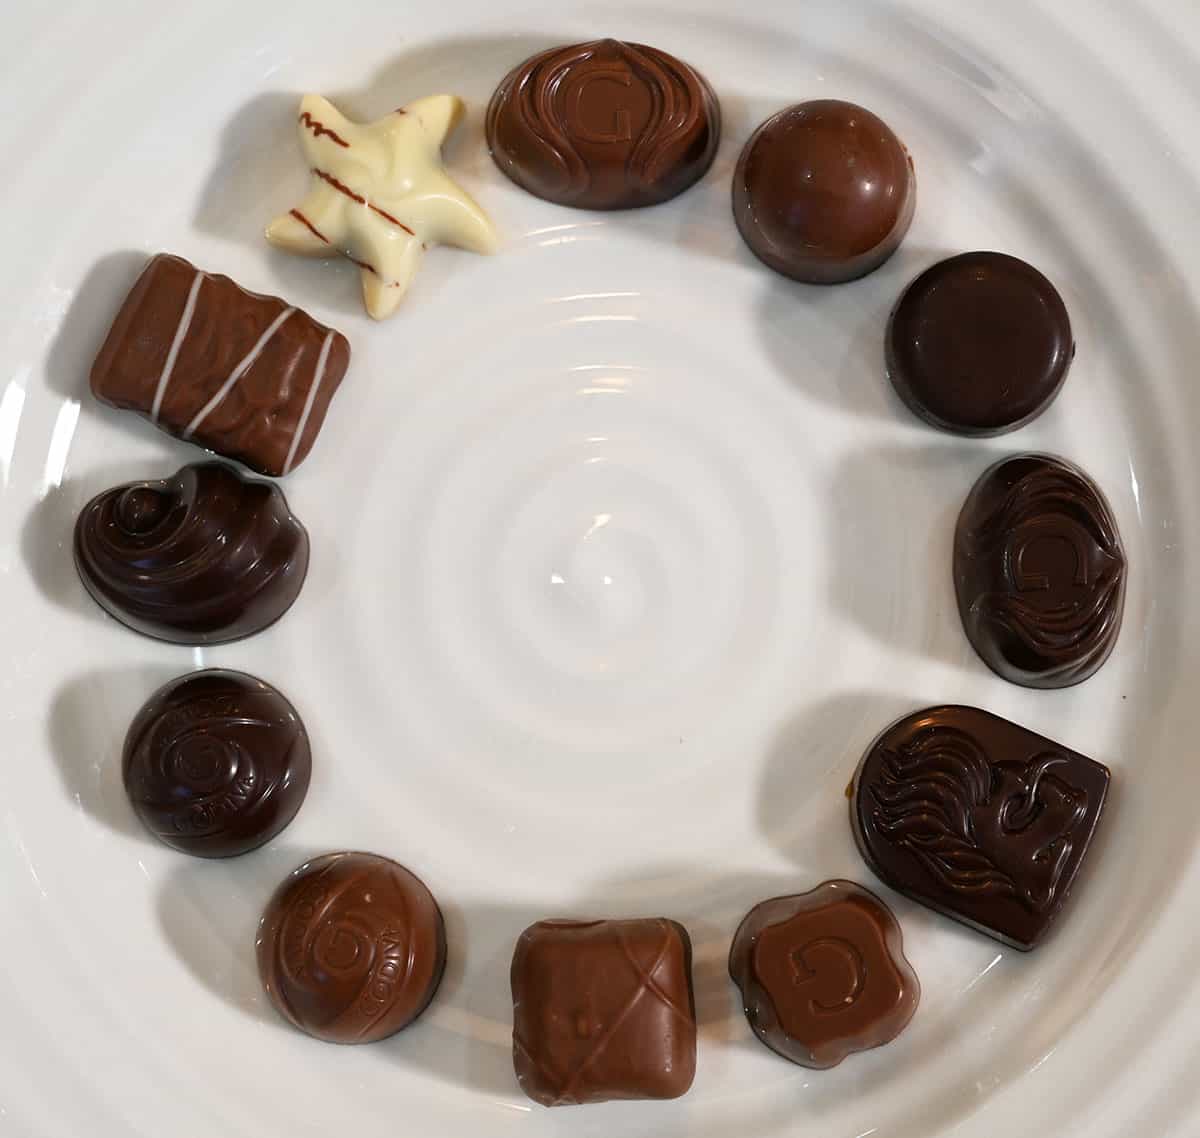 Image of all 12 different kinds of chocolates from the box in a circle.